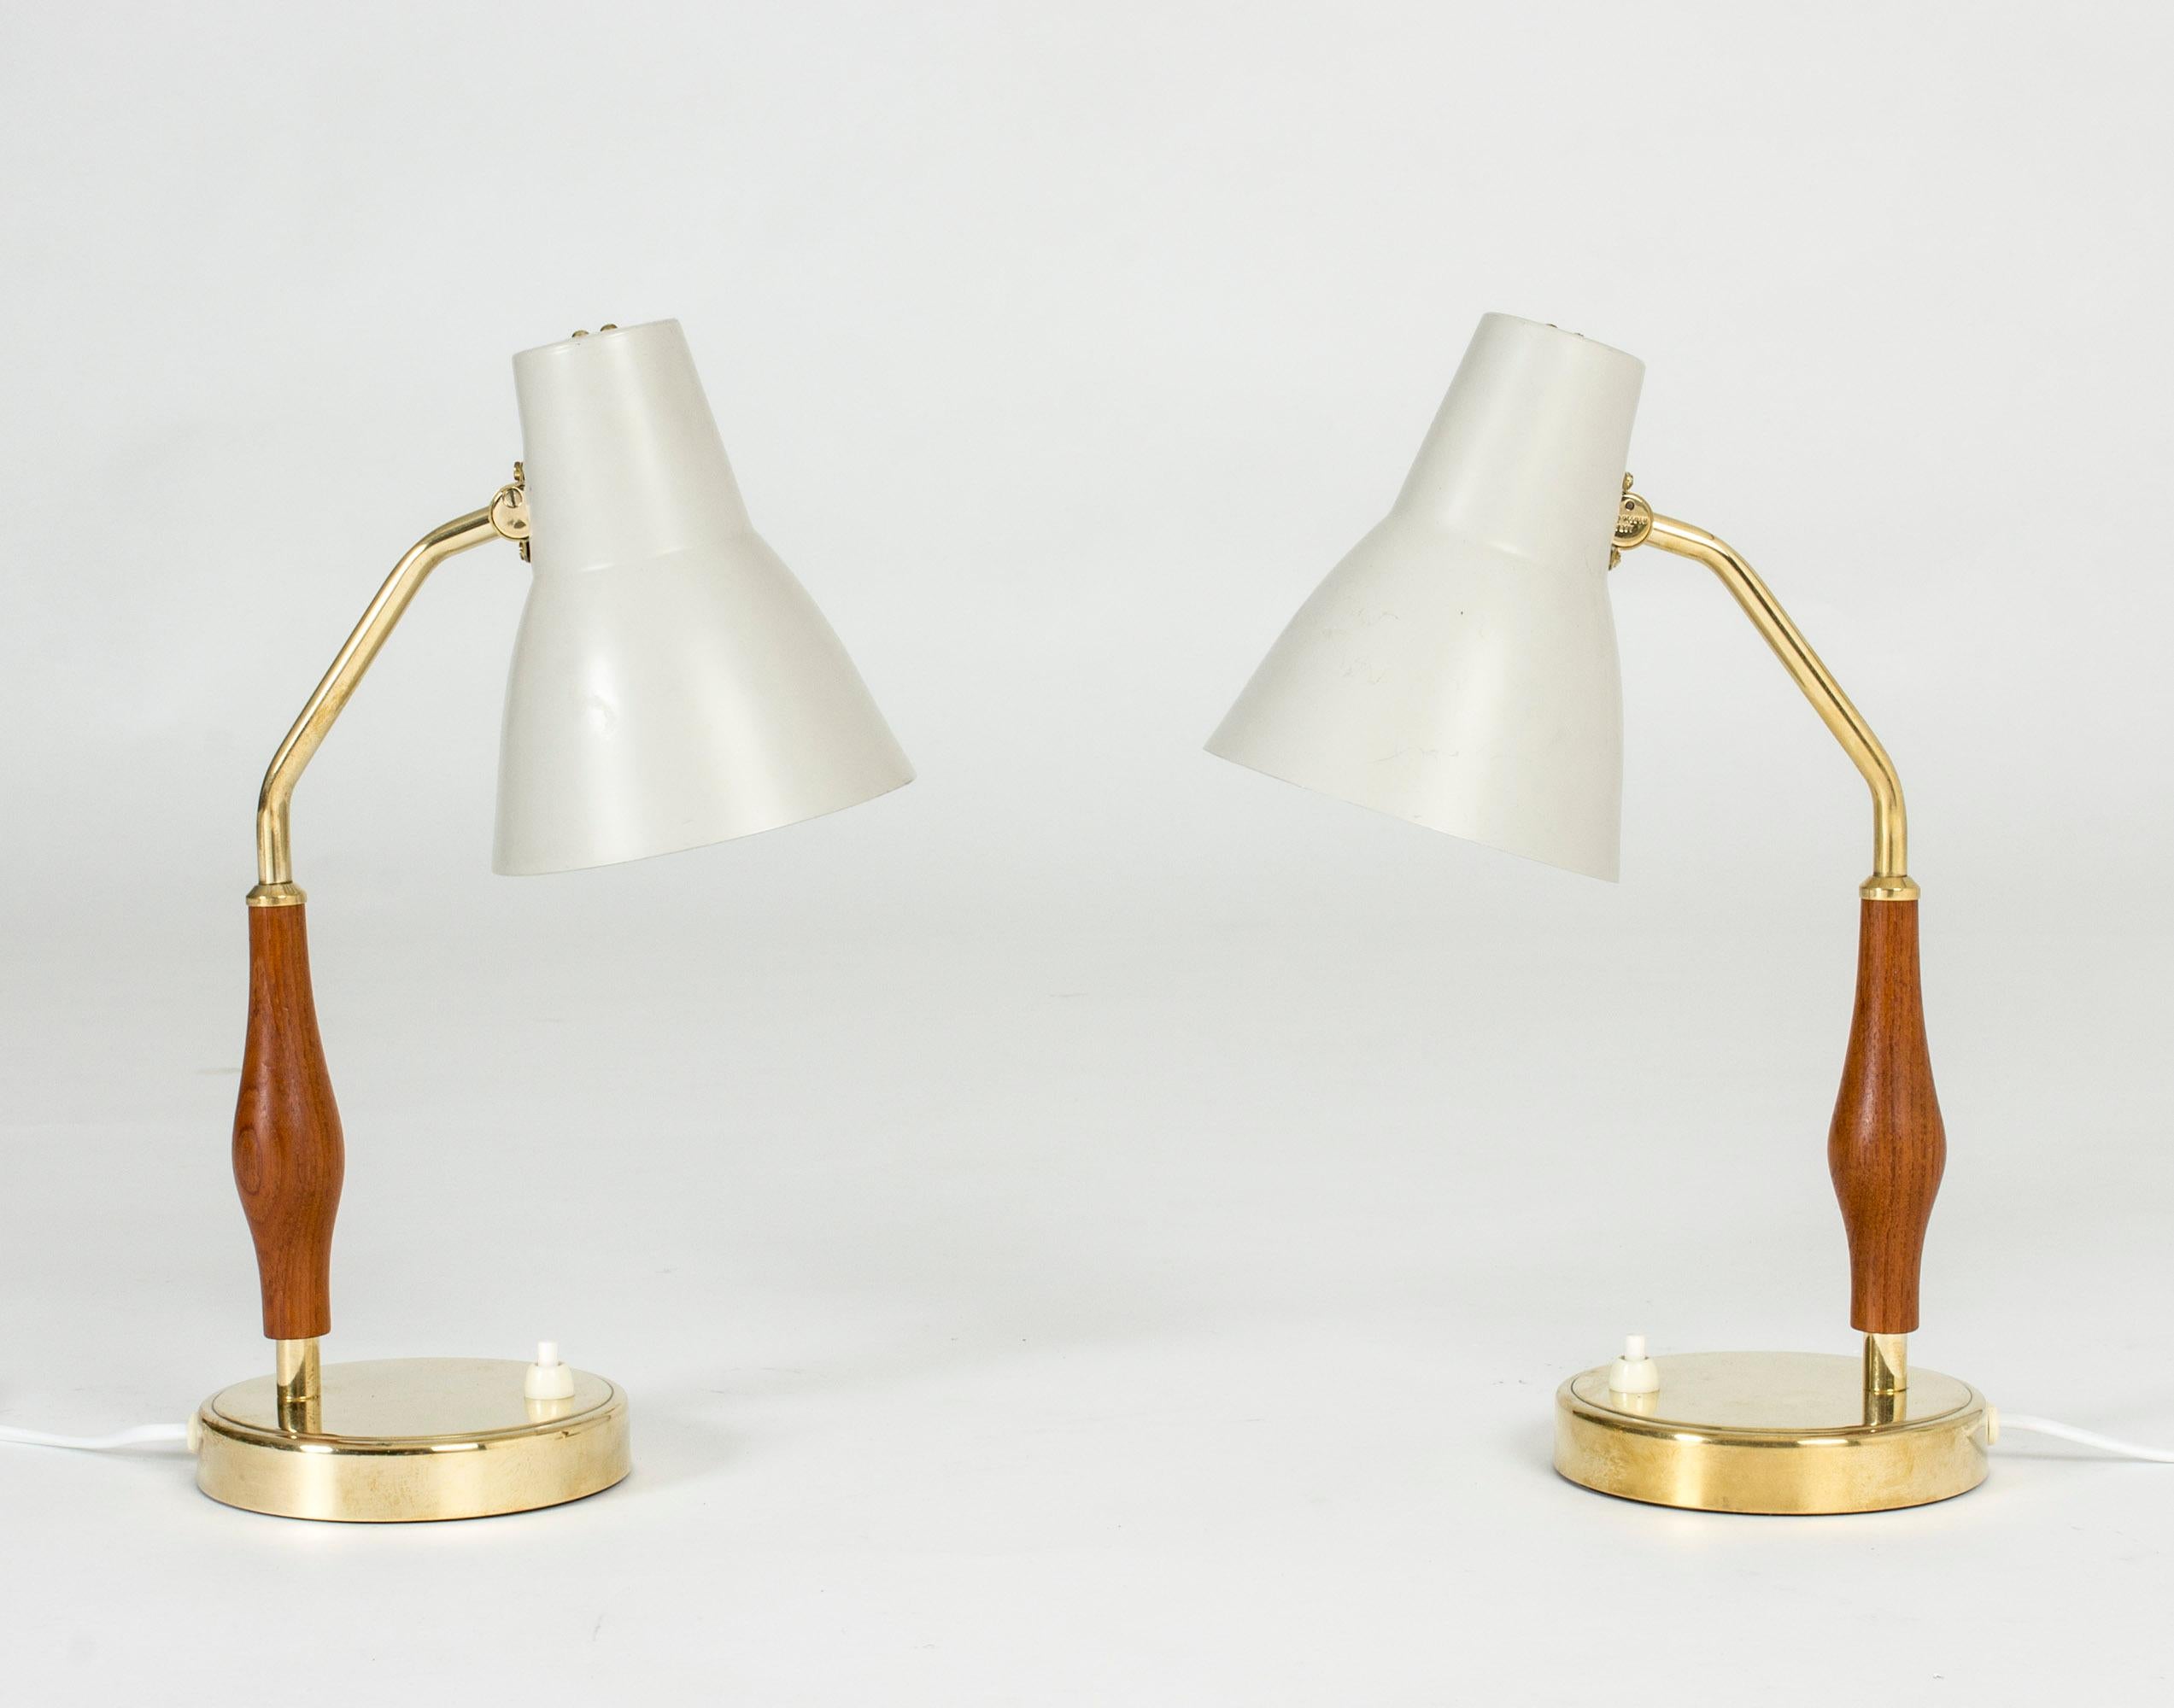 Neat pair of table lamps by Hans Bergström. Grey lacquered metal shades, brass base and sculpted teak handles.